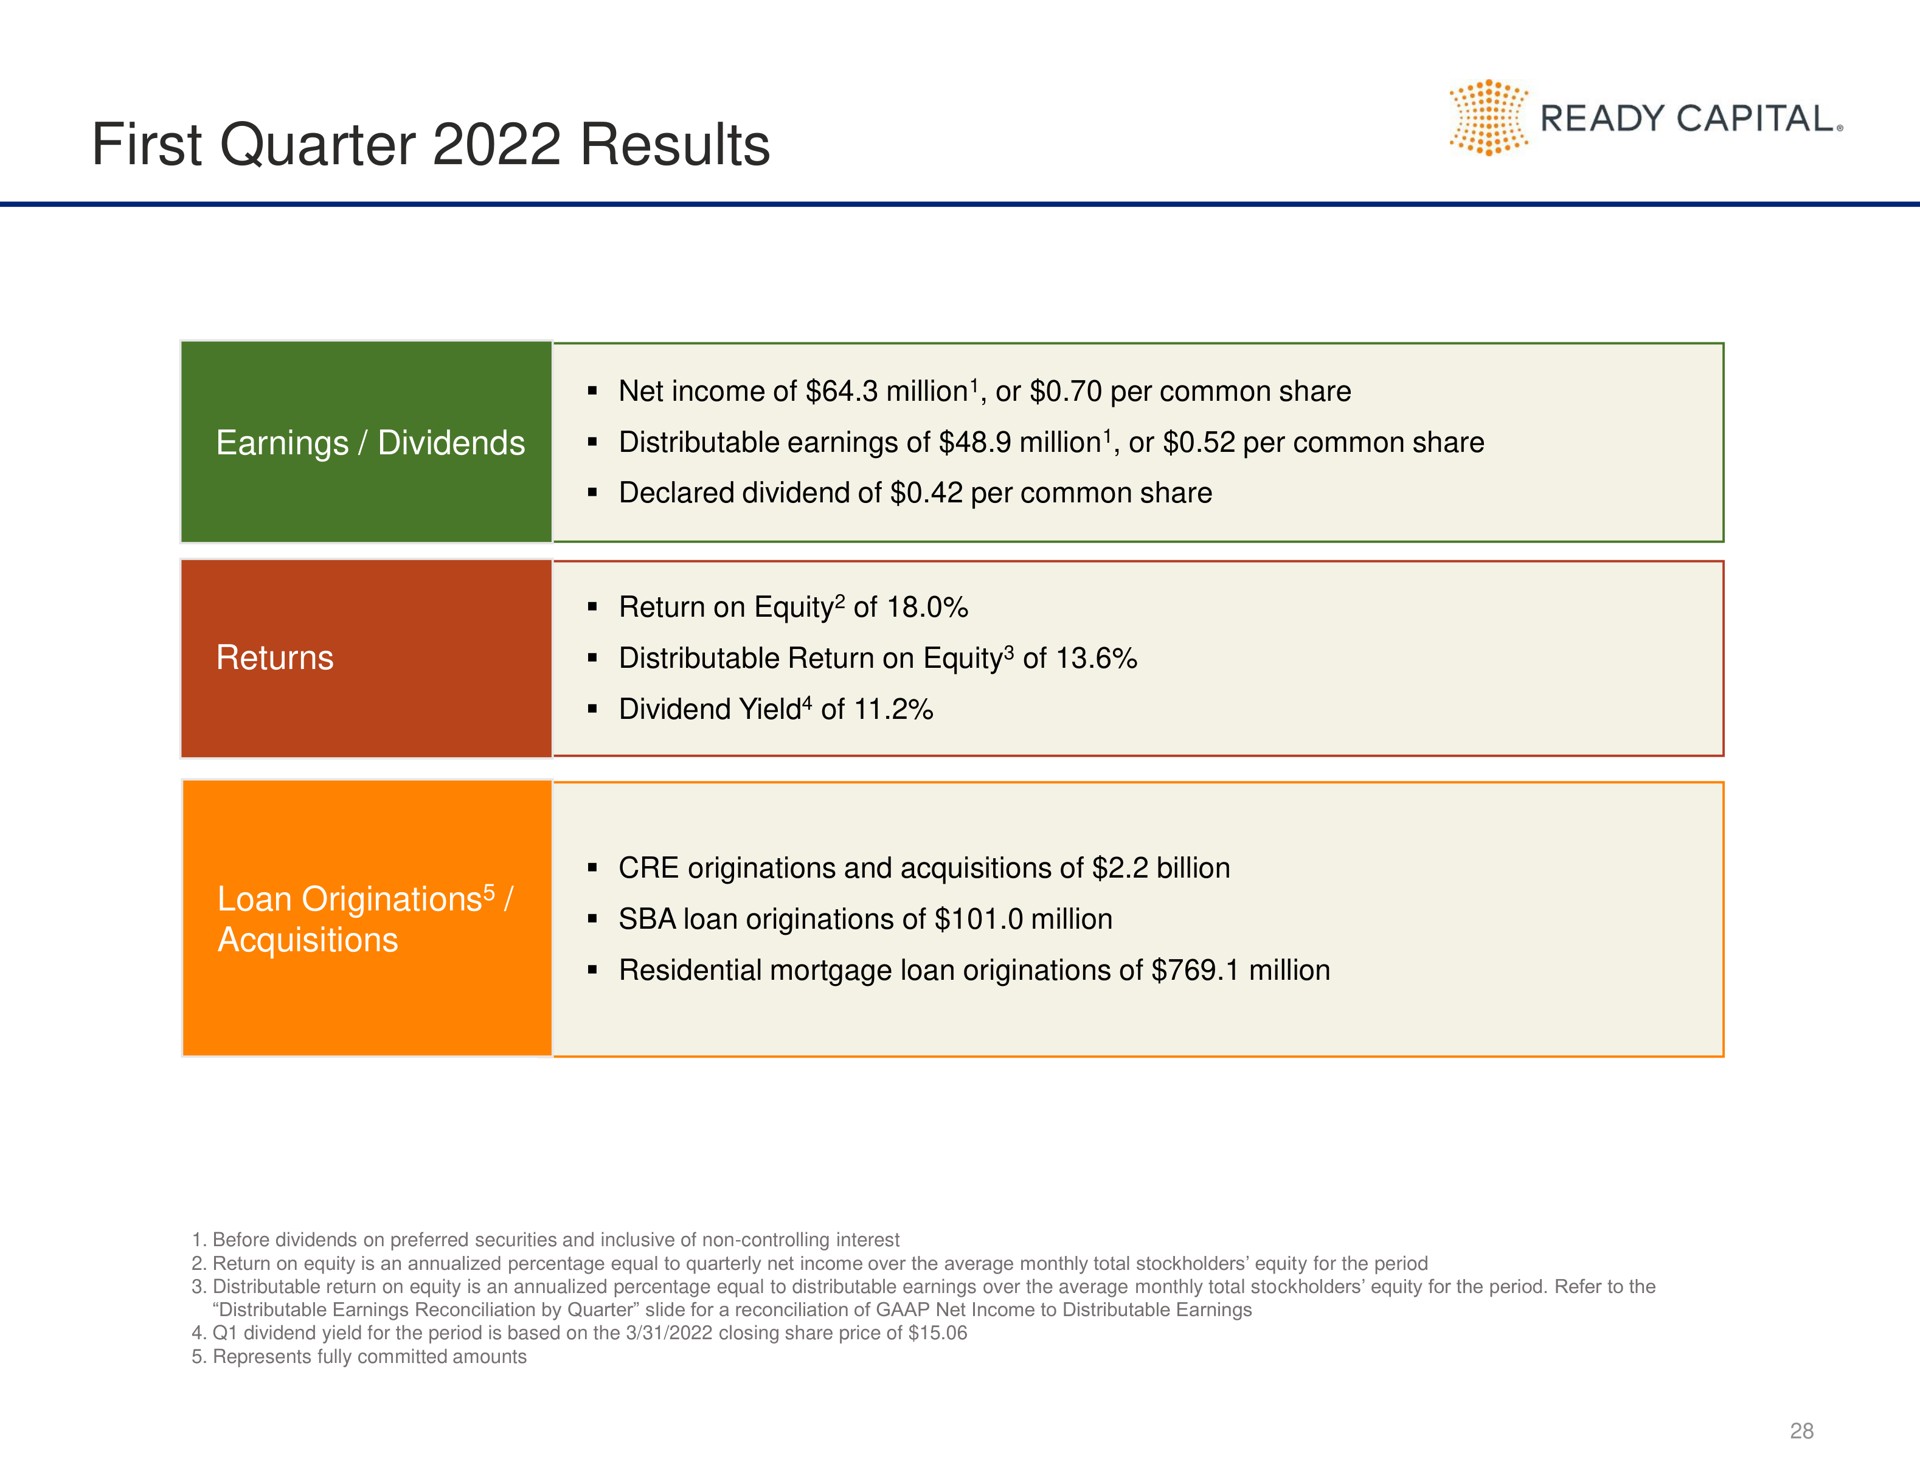 first quarter results ready capital | Ready Capital